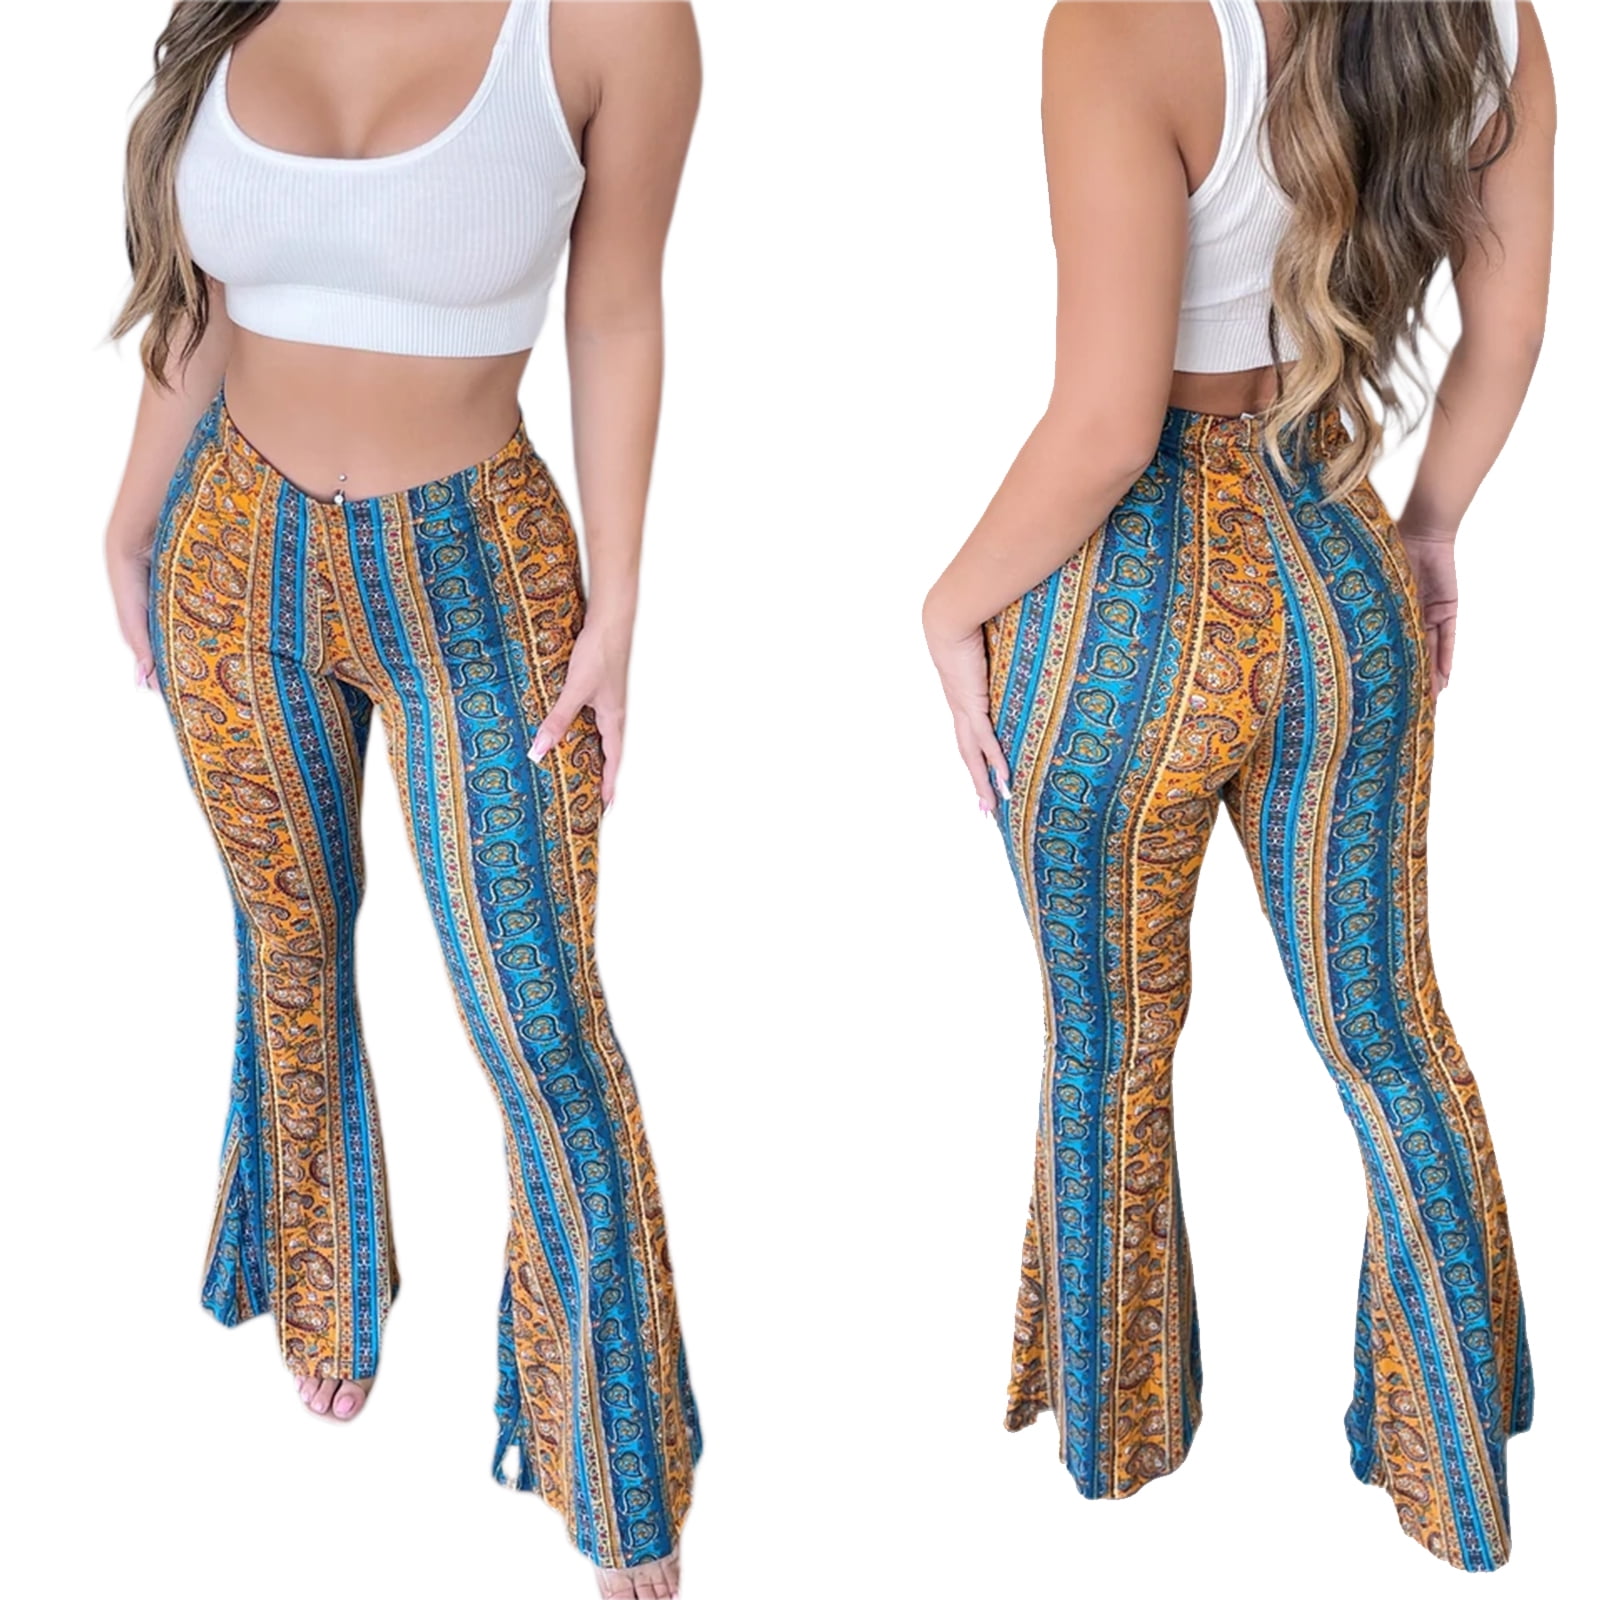 Find Cheap, Fashionable and Slimming big ass pants 